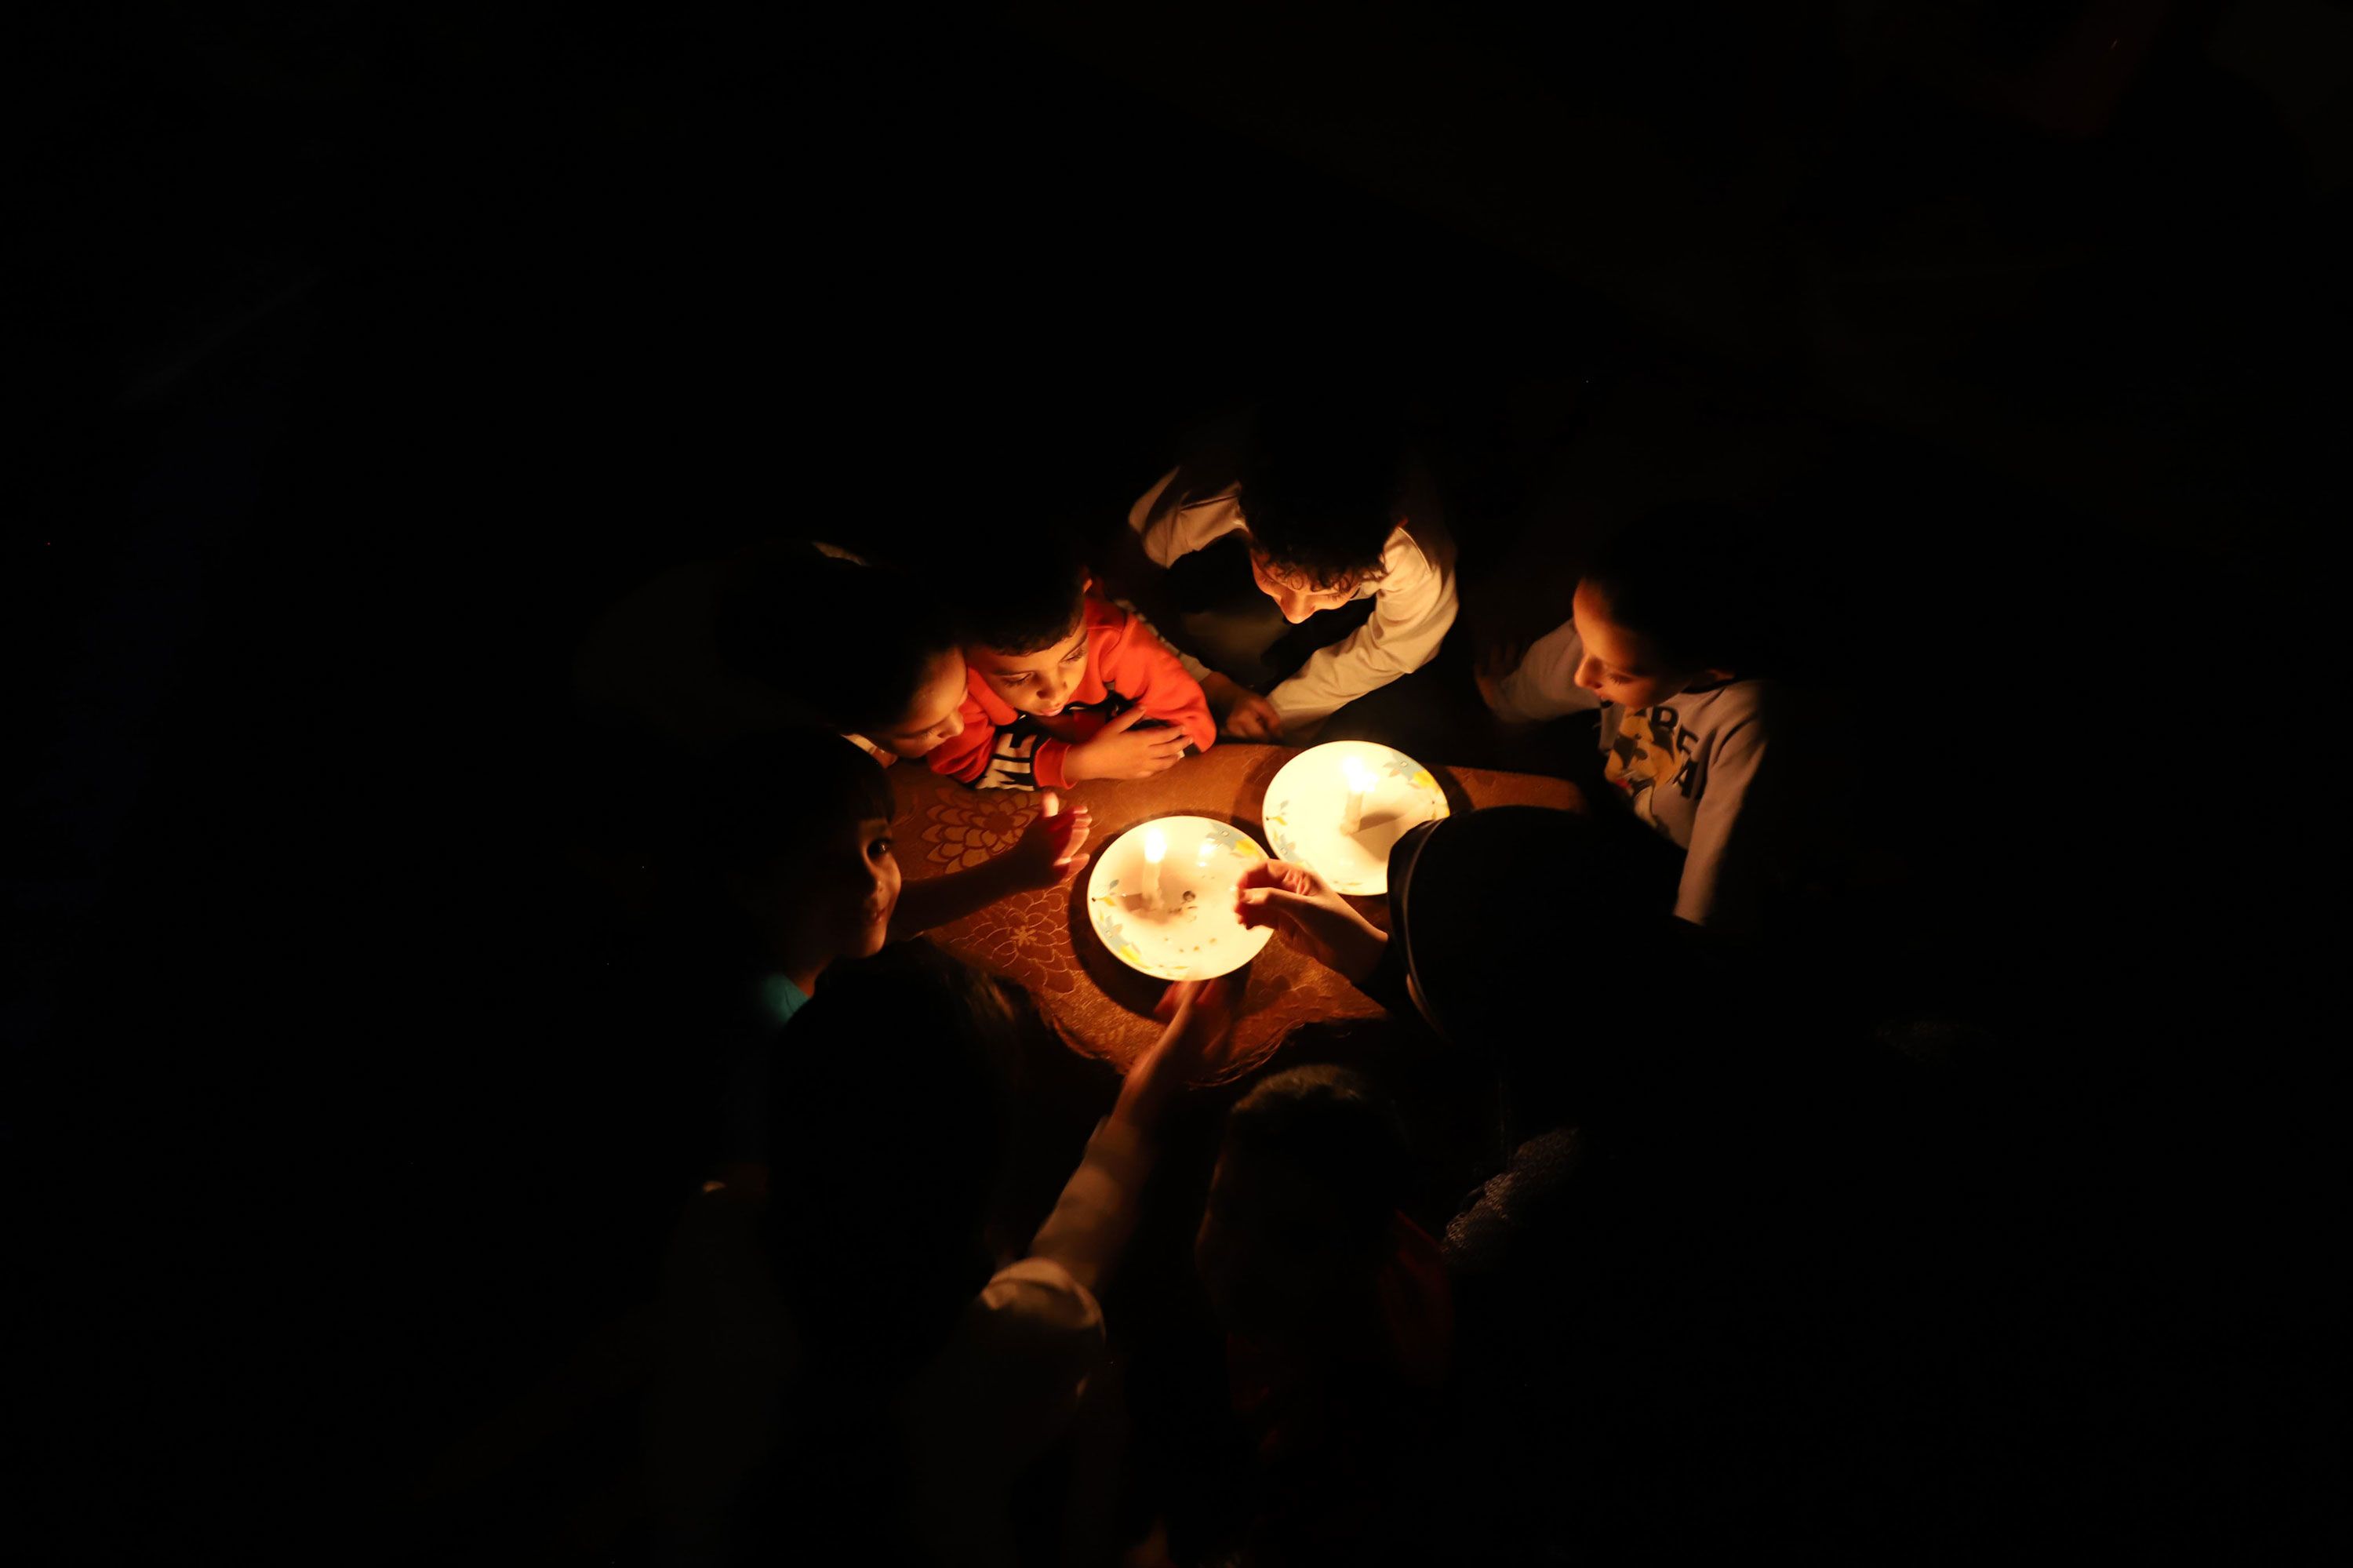 Children use candles for lighting in Khan Younis, Gaza, on Friday, October 20.